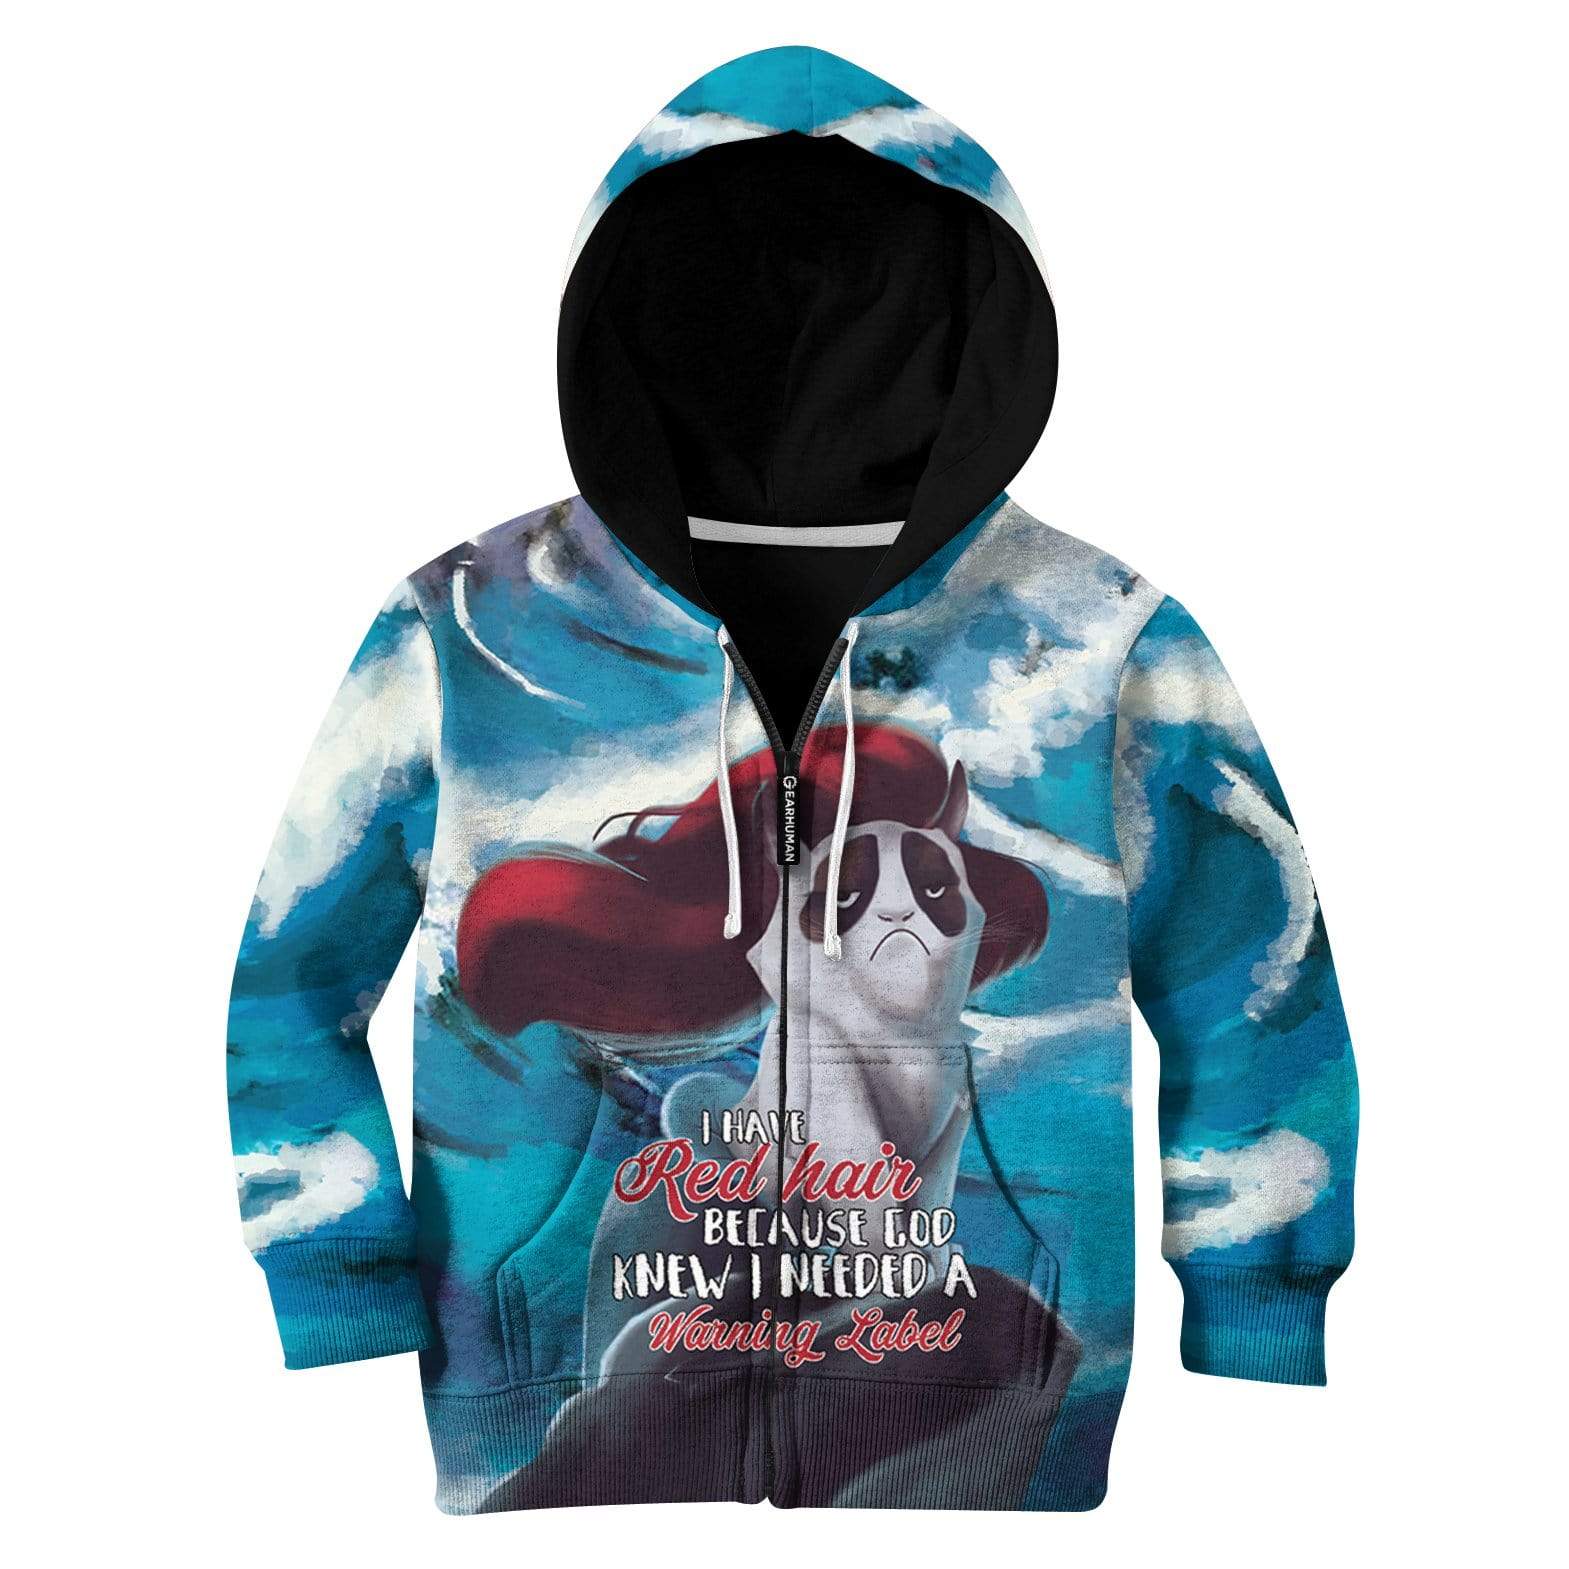 I Have Red Hair Because God Knew I Need A Warning Label Custom Hoodies T-shirt Apparel HD-GH20009K kid 3D apparel Kid Zip Hoodie S/6-8 